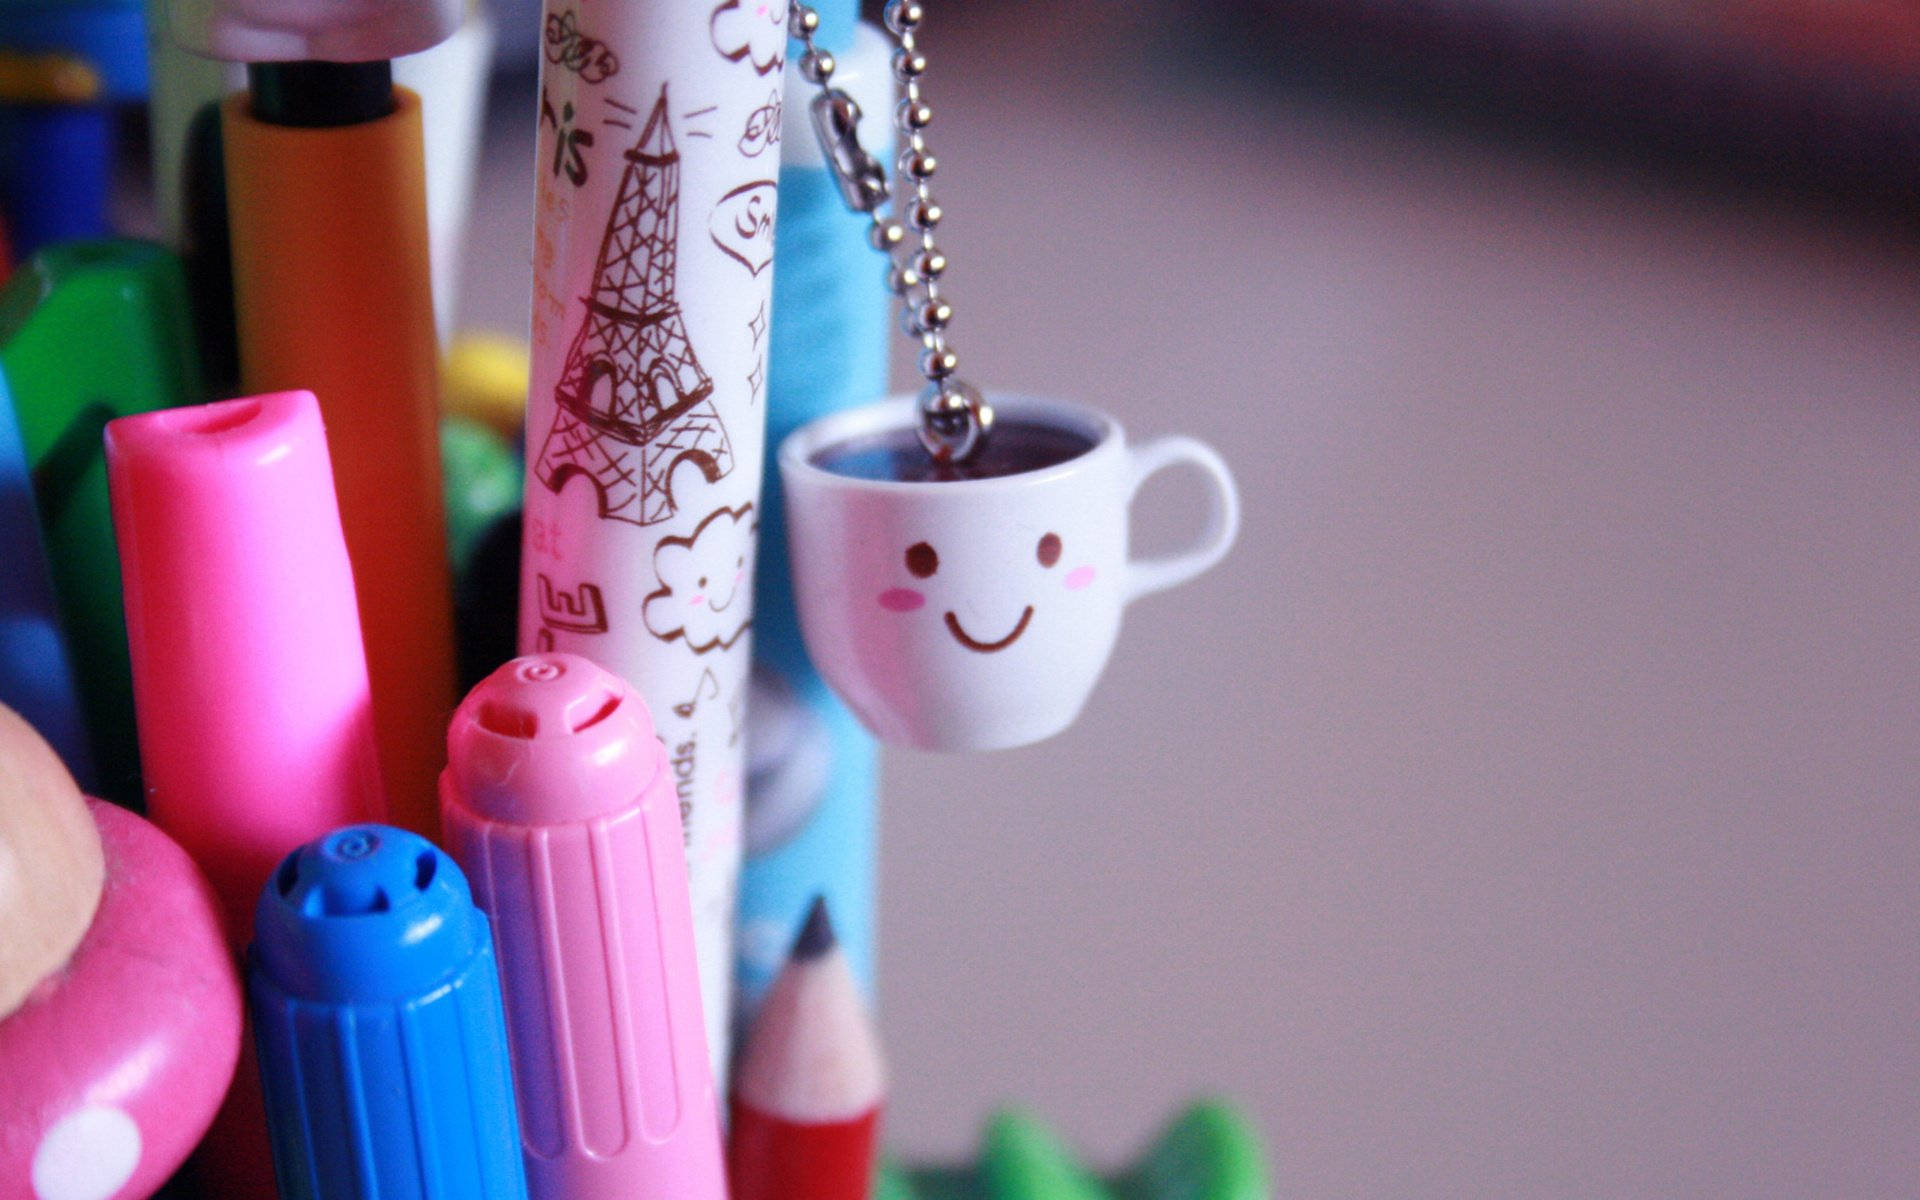 Cute Aesthetic Cup And Pens Wallpaper